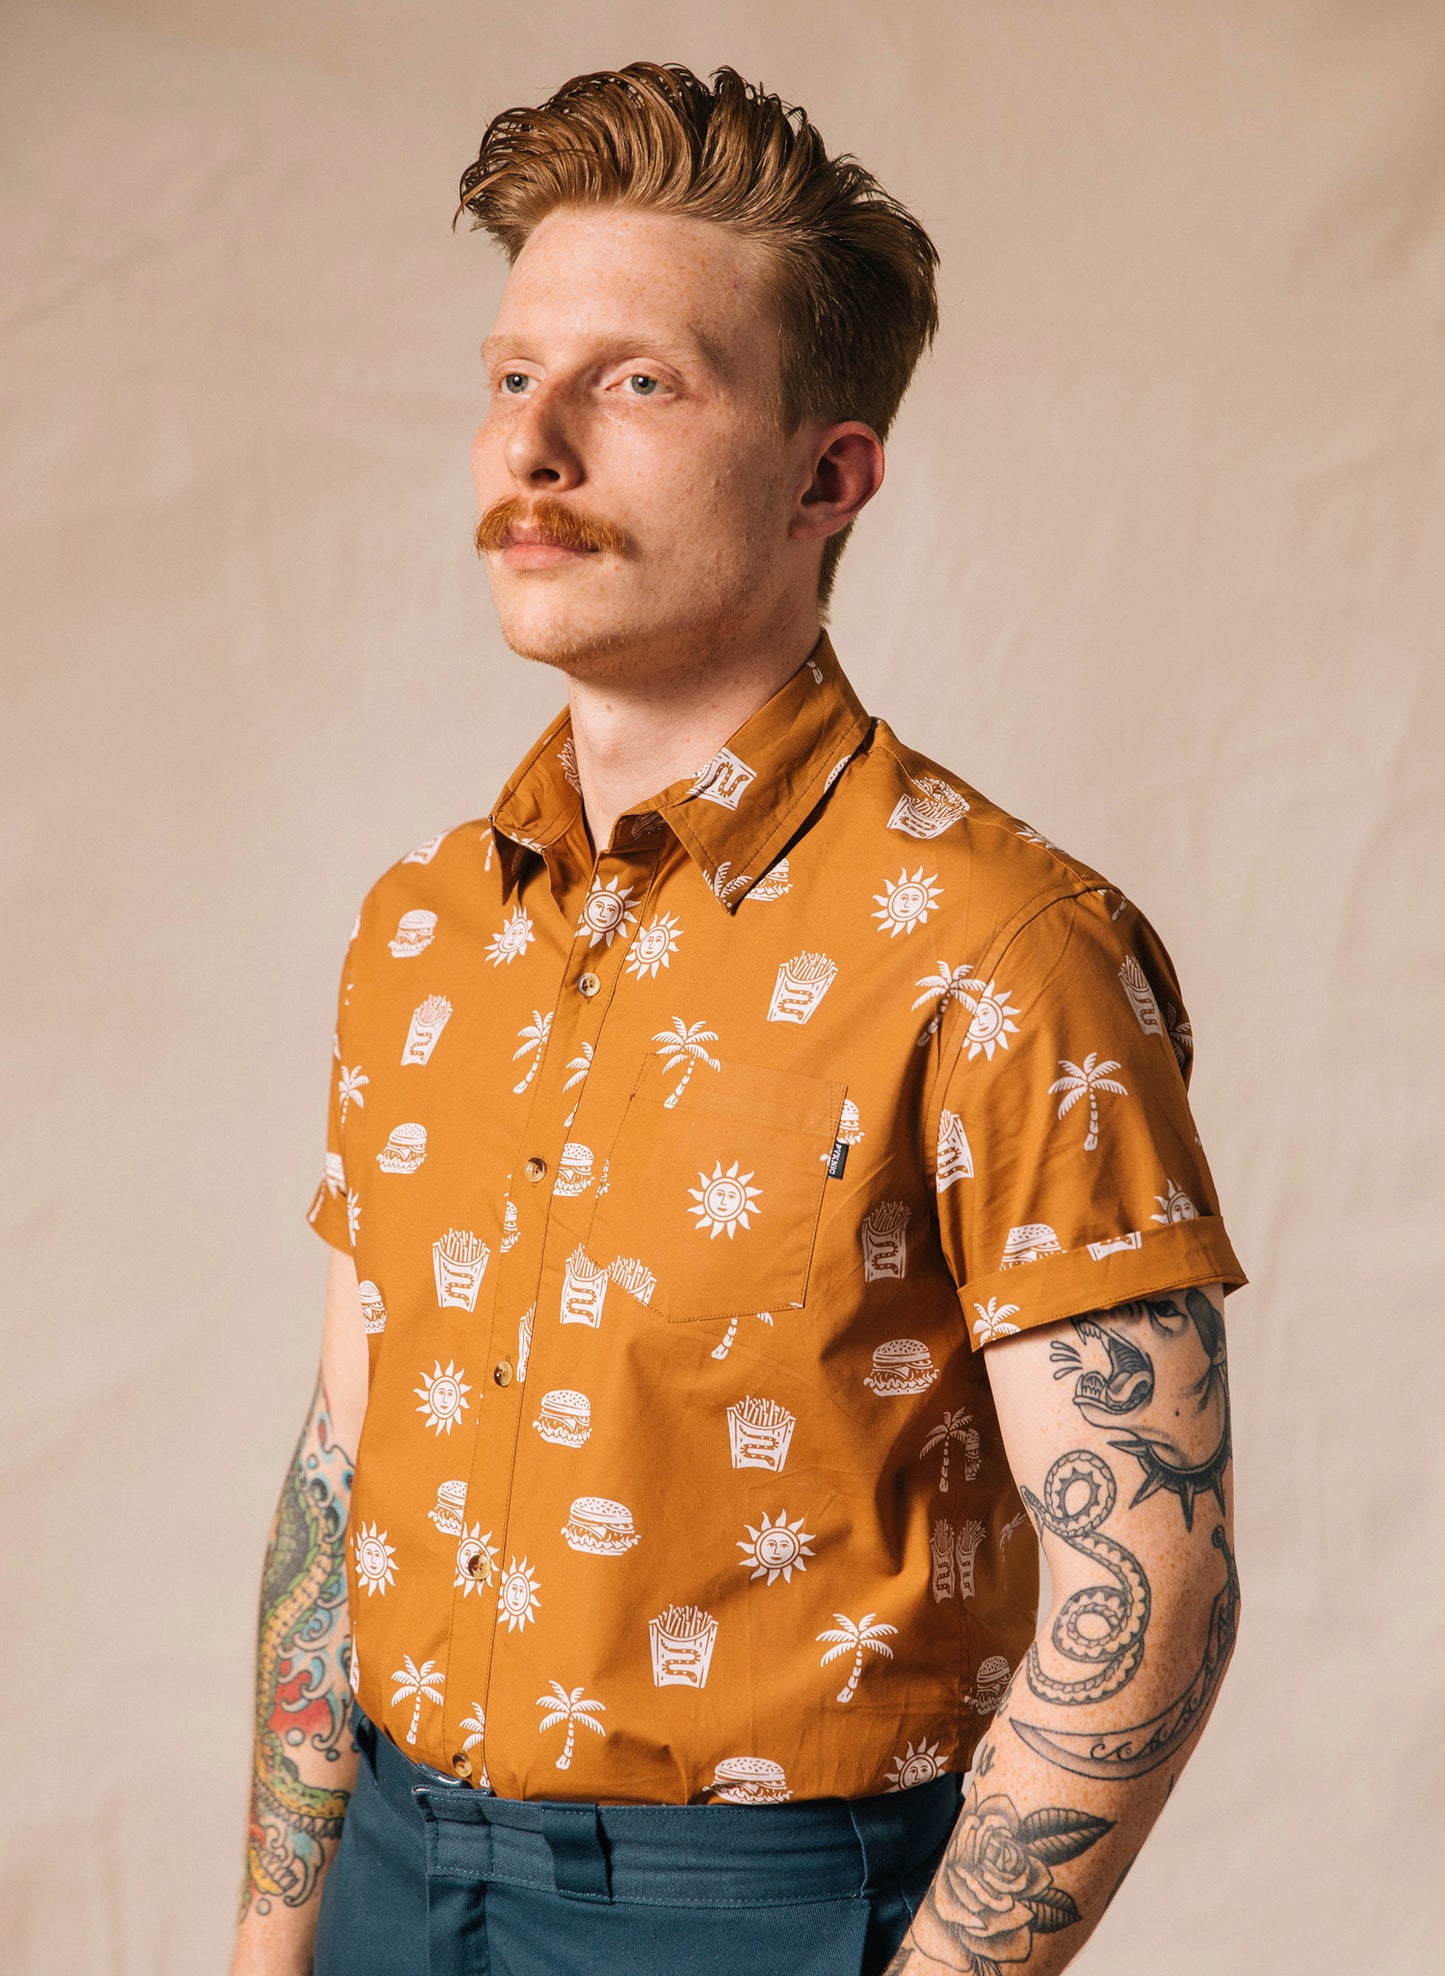 Pyknic | Take It Greasy Burger and Fries Vacation Casual Button-Up Shirt | Button Down Shirt with All Over Graphic Print, In N Out Palm Tree Shirt, Cool Food Shirt, Best Foodie Shirt, Best Foodie Gift, Food Themed Apparel, Food Tattoo Flash, Burgers and French Fries Pattern Button Down Shirt, Cool Button Up Shirts, Alternative Lifestyle Brand, Motorcycle Lifestyle Brand, Cheeseburger Shirt